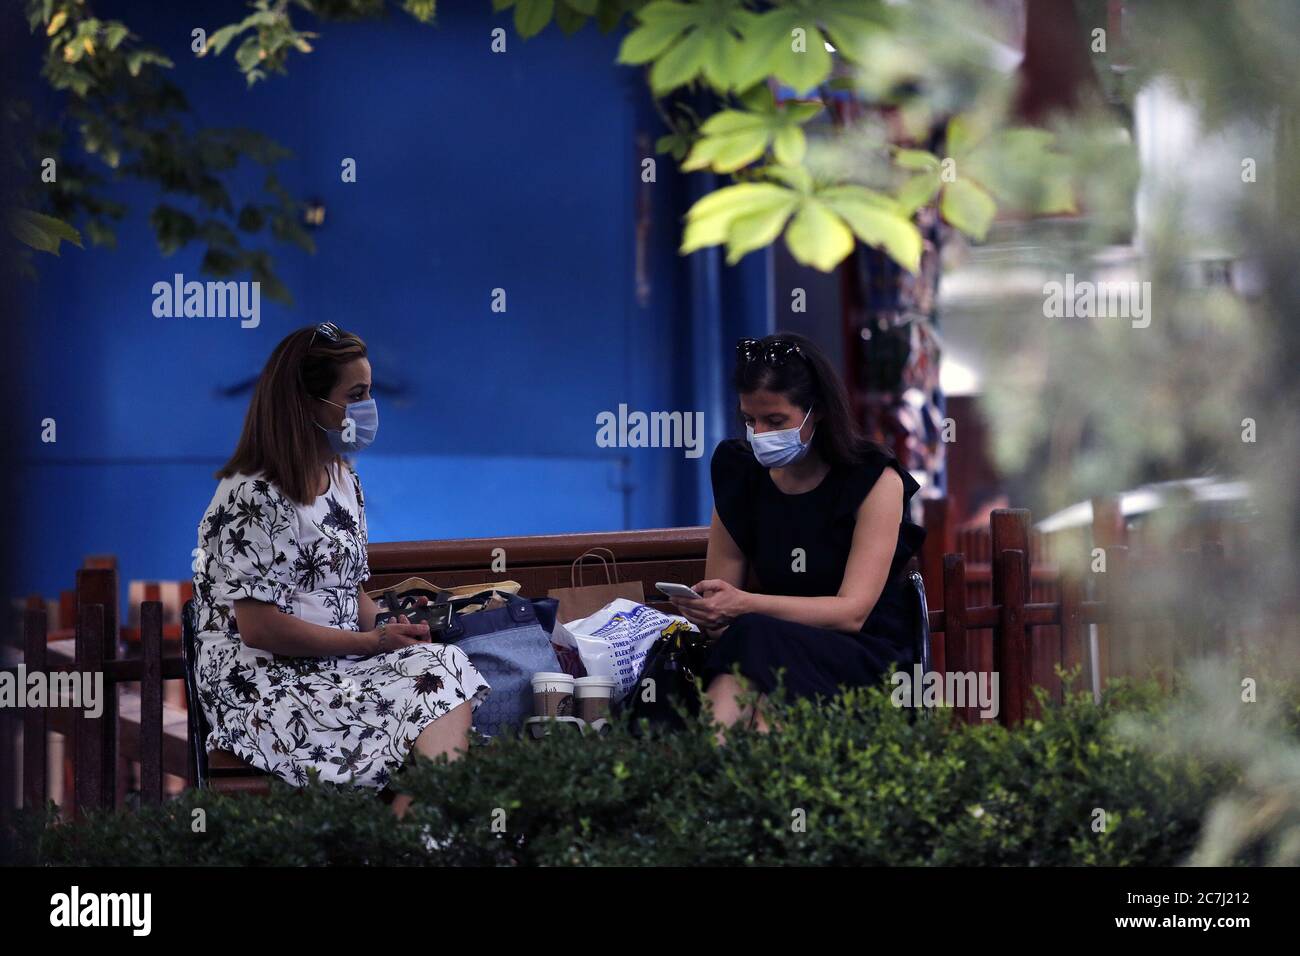 Ankara, Turkey. 17th July, 2020. Women wearing face masks sit on a bench in Ankara, Turkey, on July 17, 2020. Turkish Health Minister Fahrettin Koca on Friday warned of the increasing number of intensive care and intubated COVID-19 patients in the country. Turkey's daily coronavirus cases increased by 926 on Friday, raising the overall number to 217,799, the minister said. Credit: Mustafa Kaya/Xinhua/Alamy Live News Stock Photo